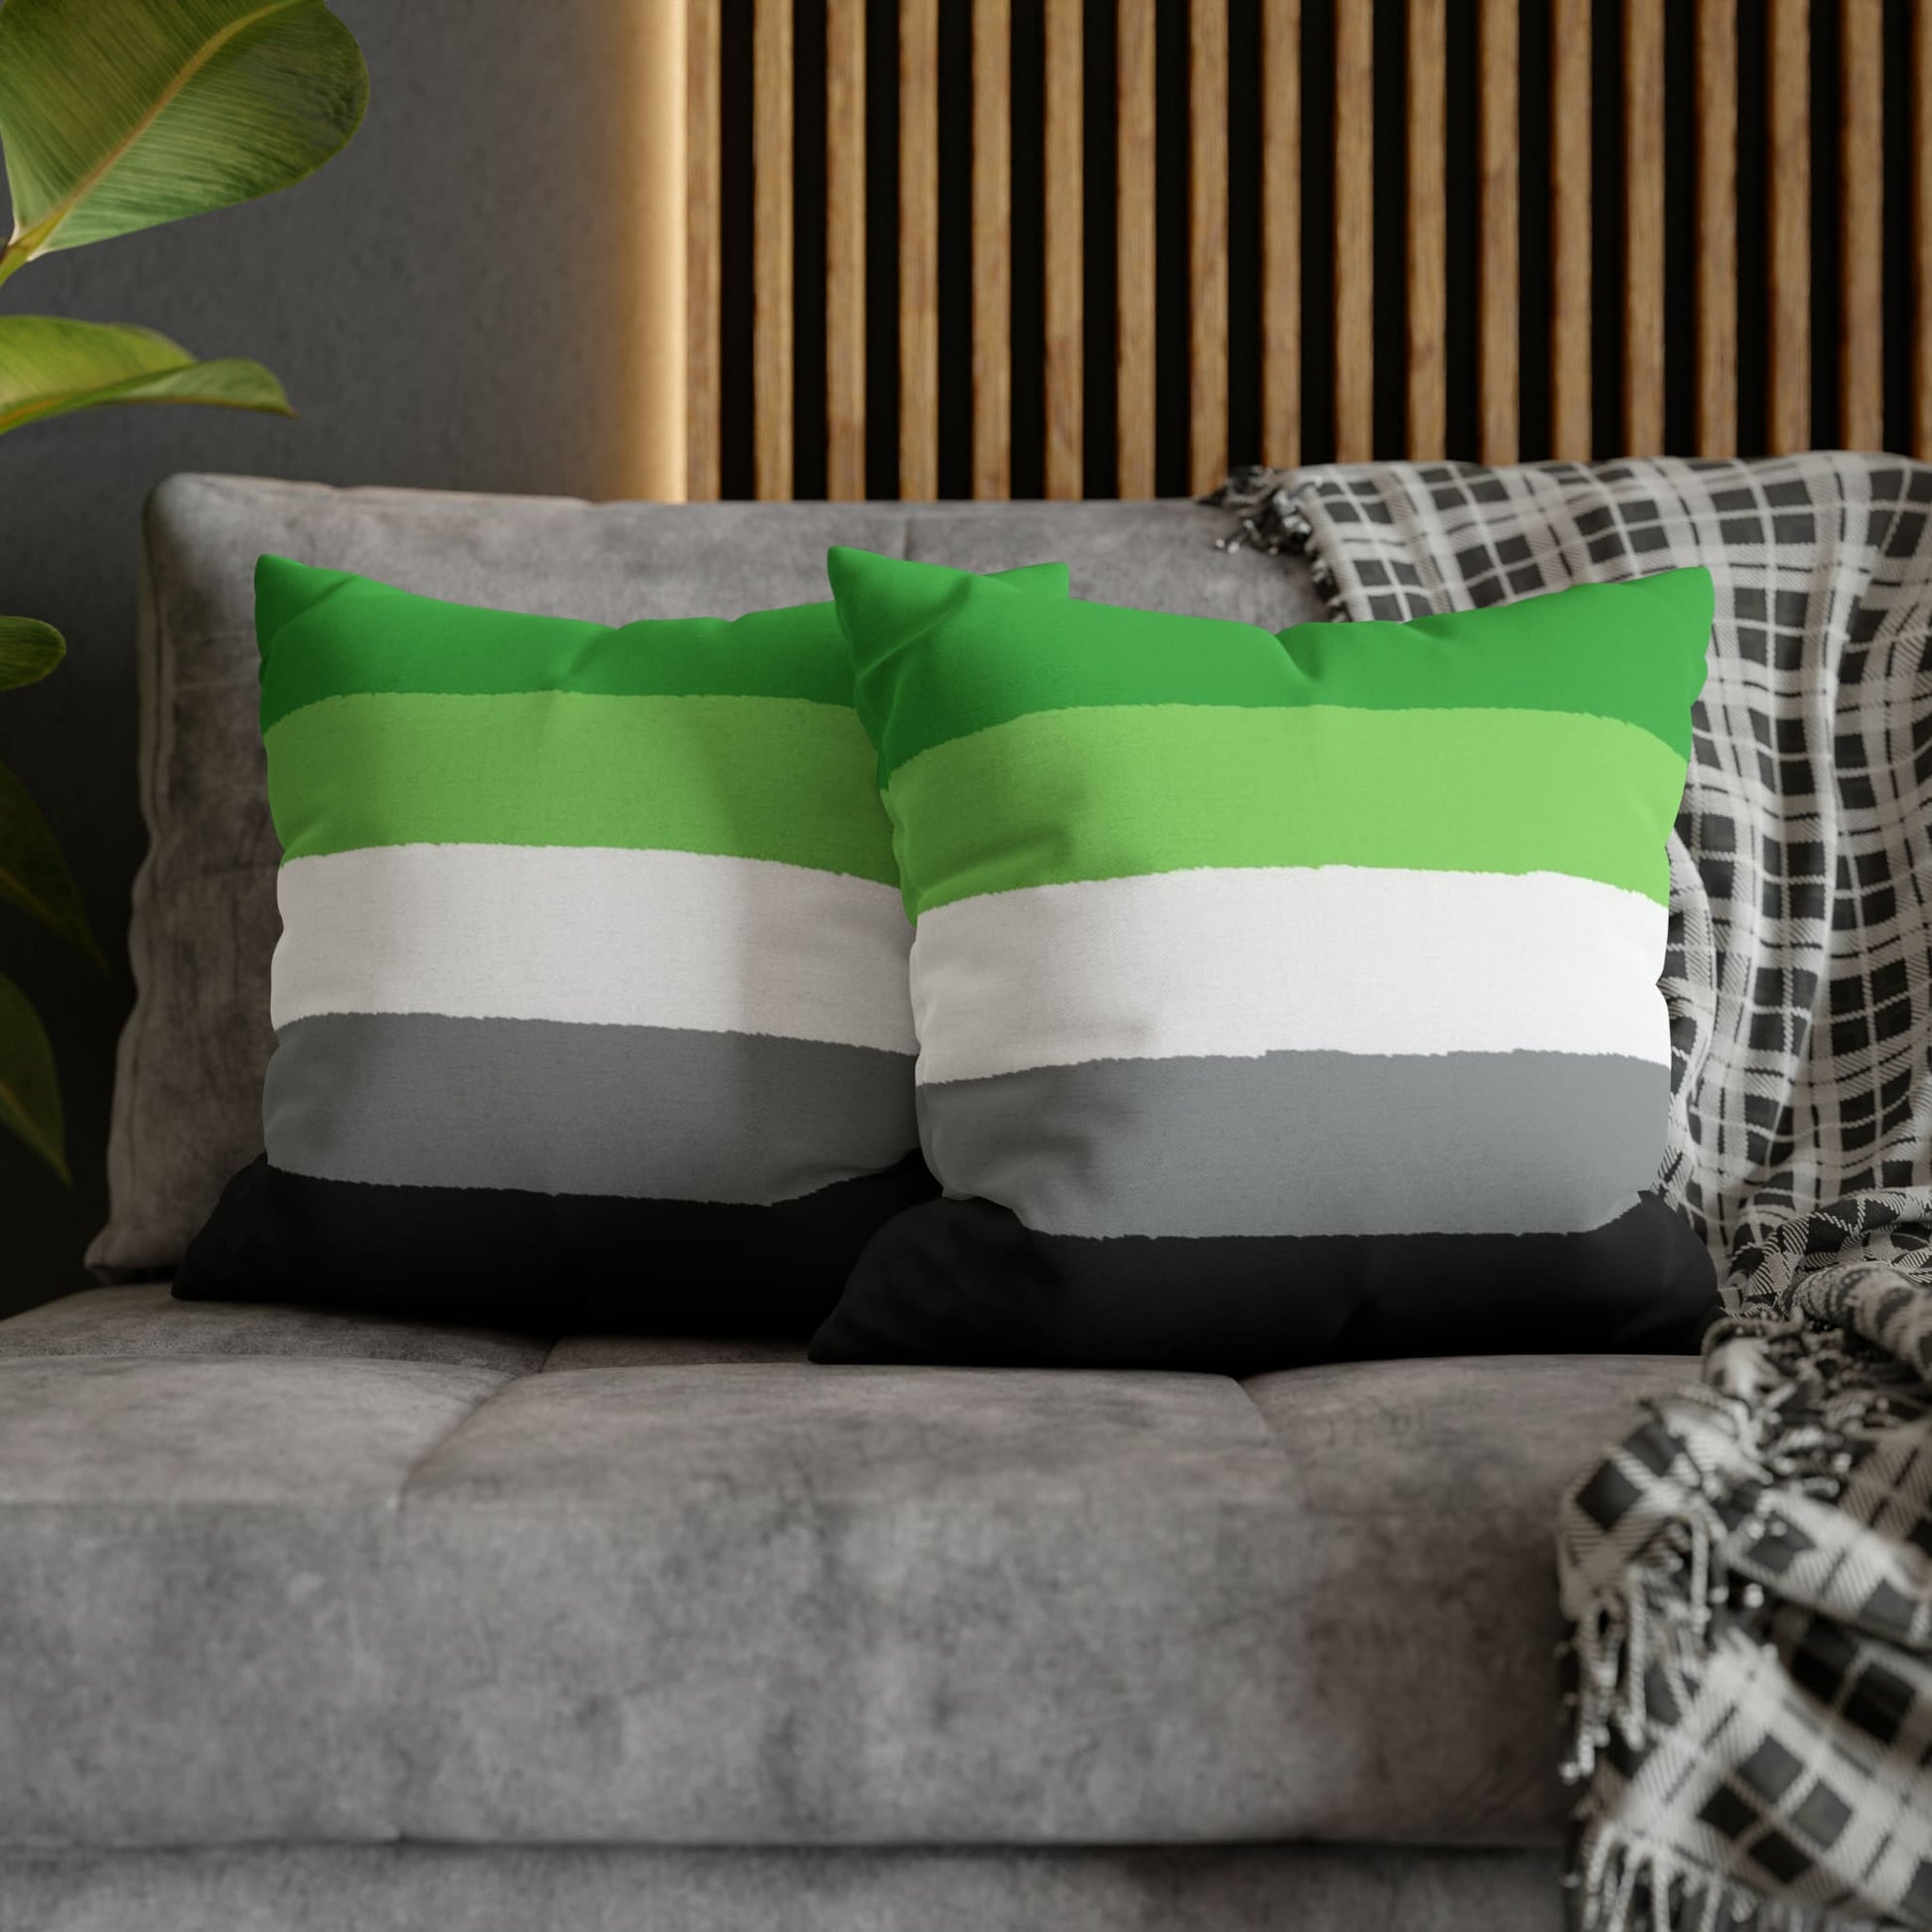 2 aromantic pillows on couch